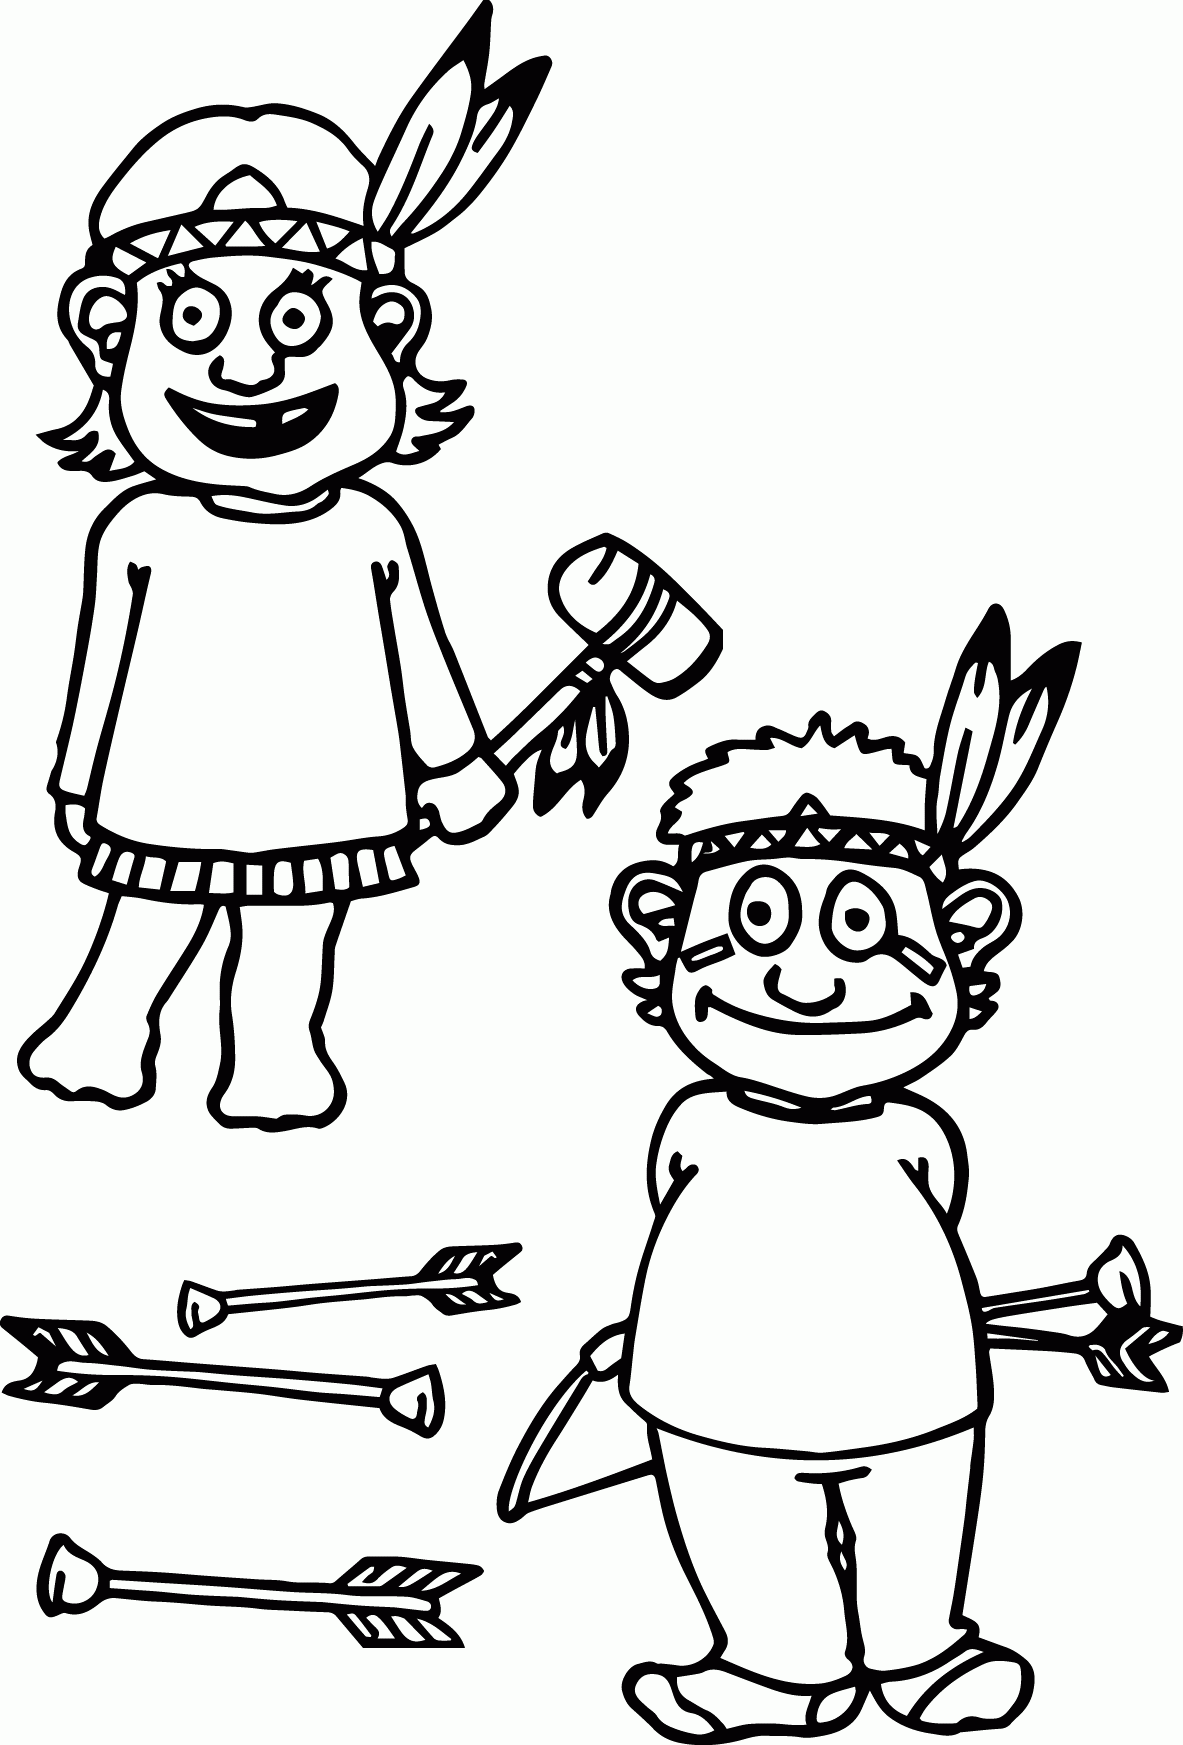 Red Indian Childrens Coloring Page | Wecoloringpage